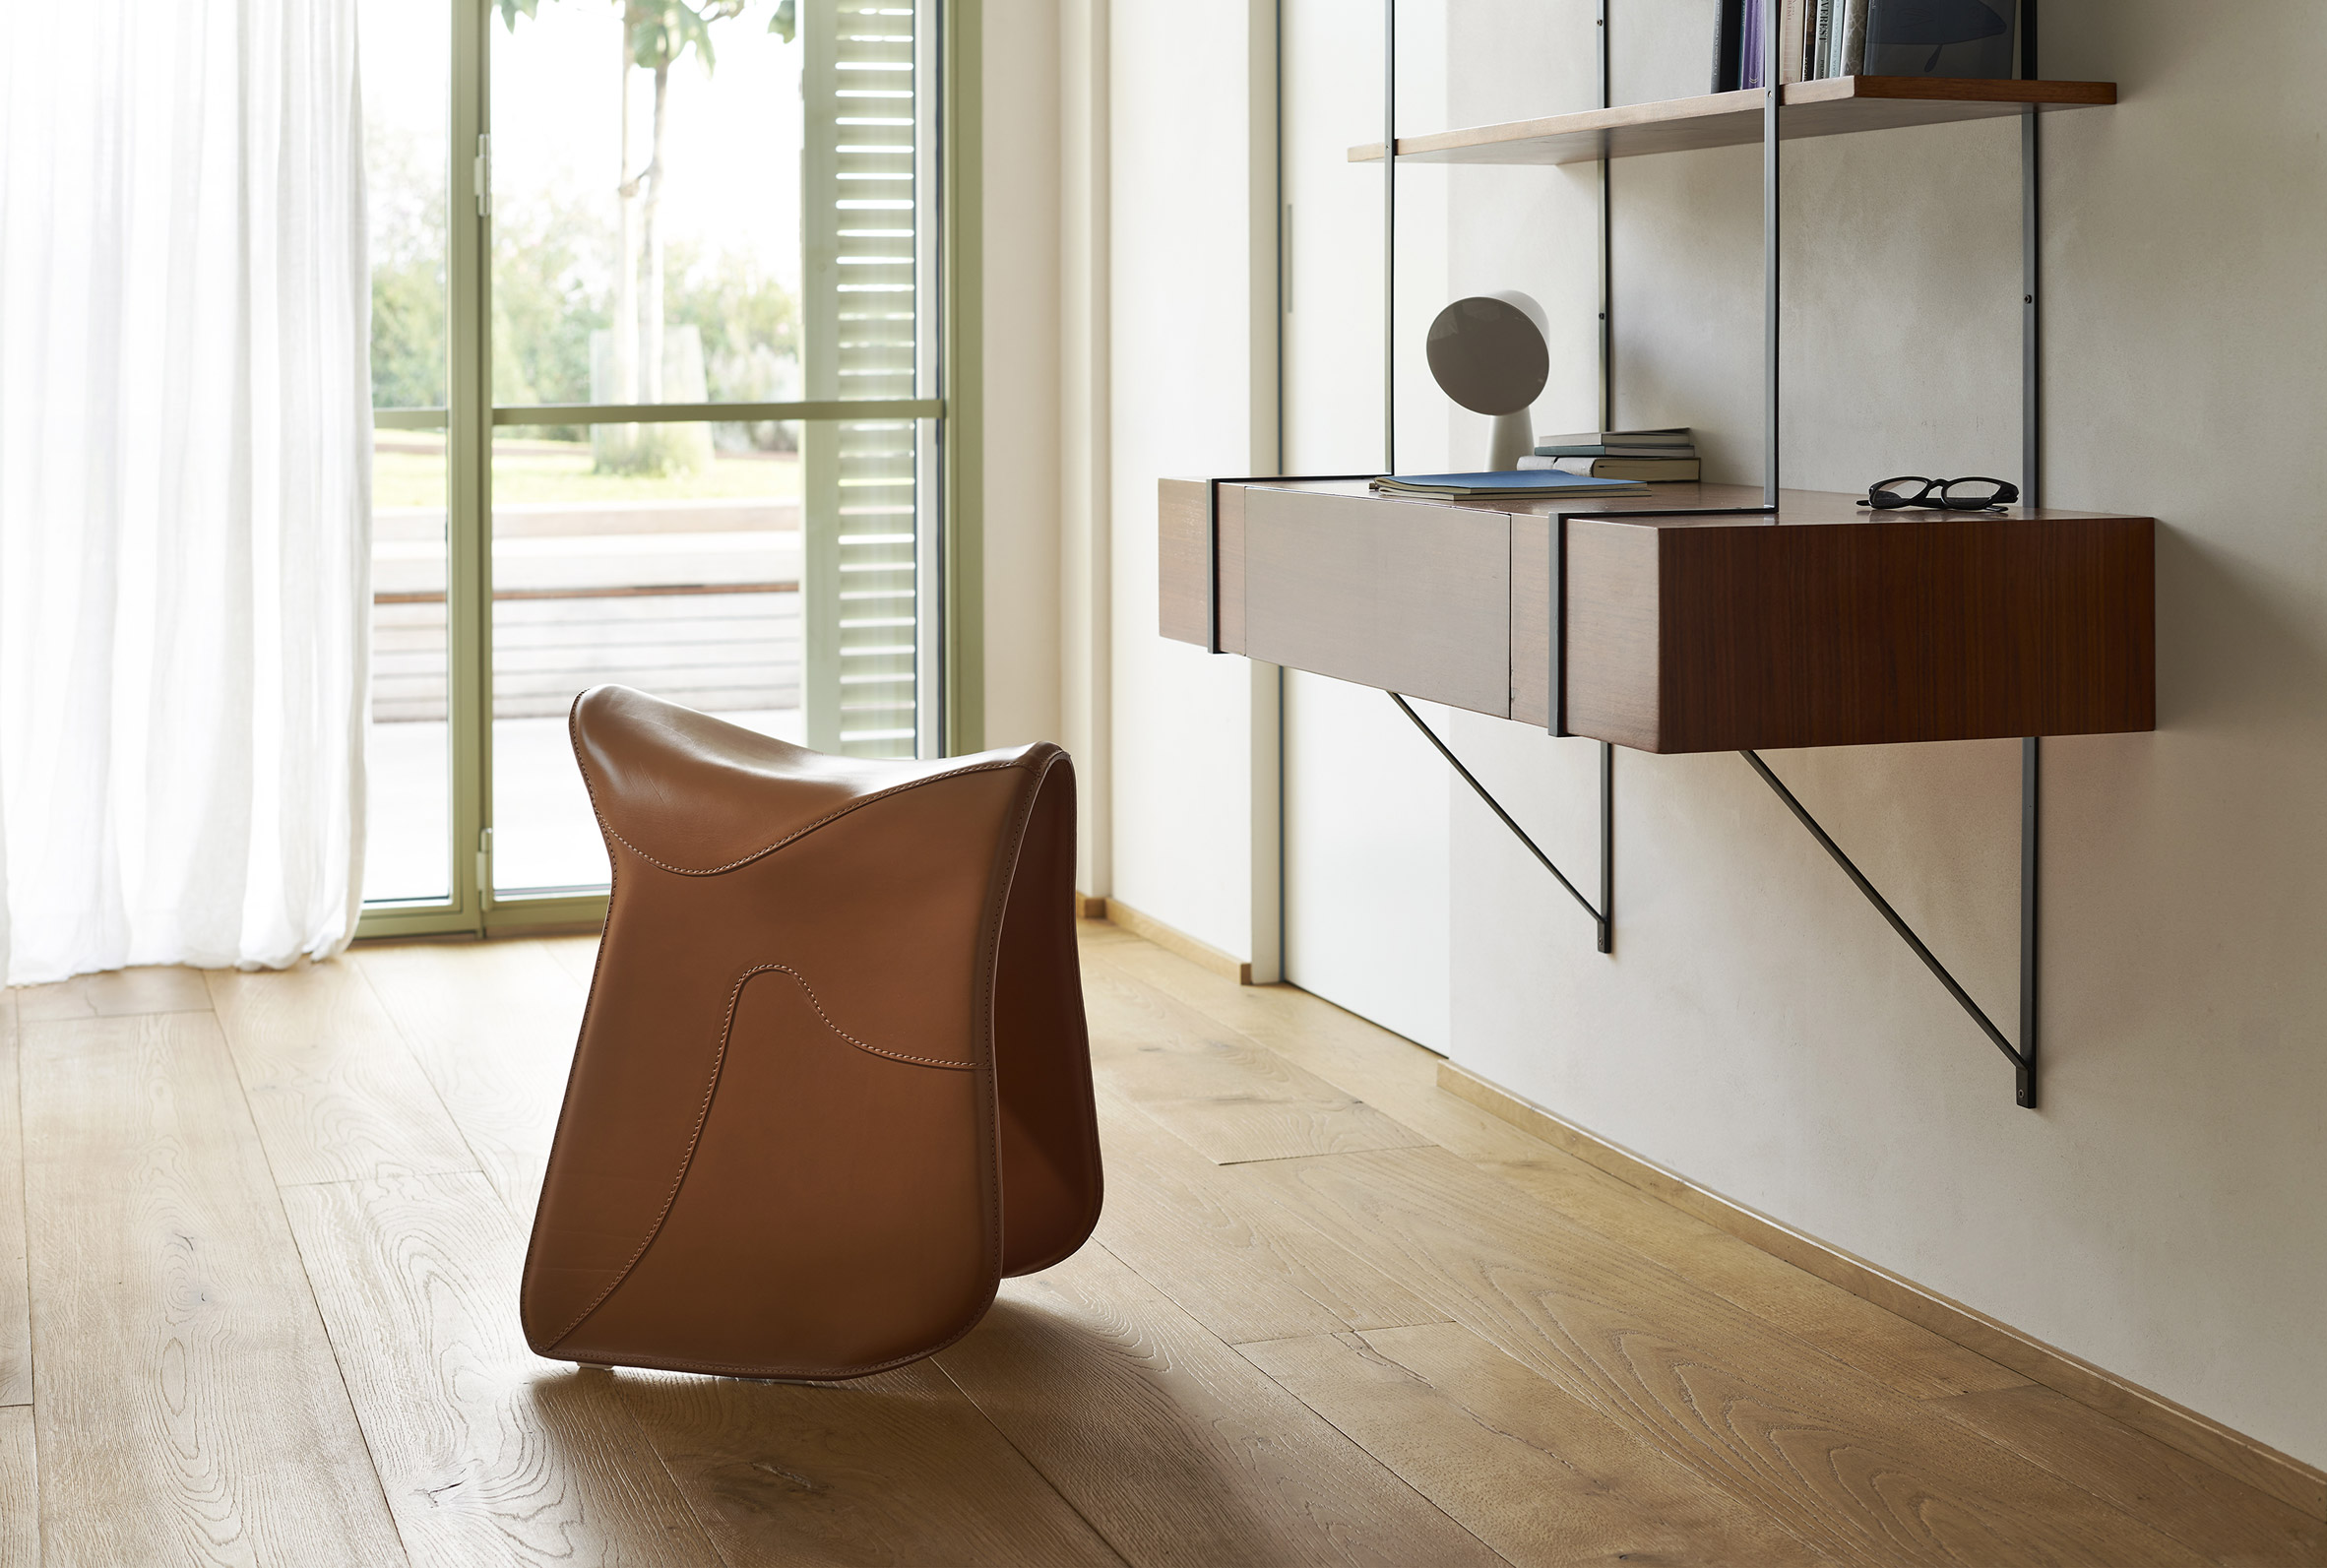 The Pepe stool used in a light and airy home office space